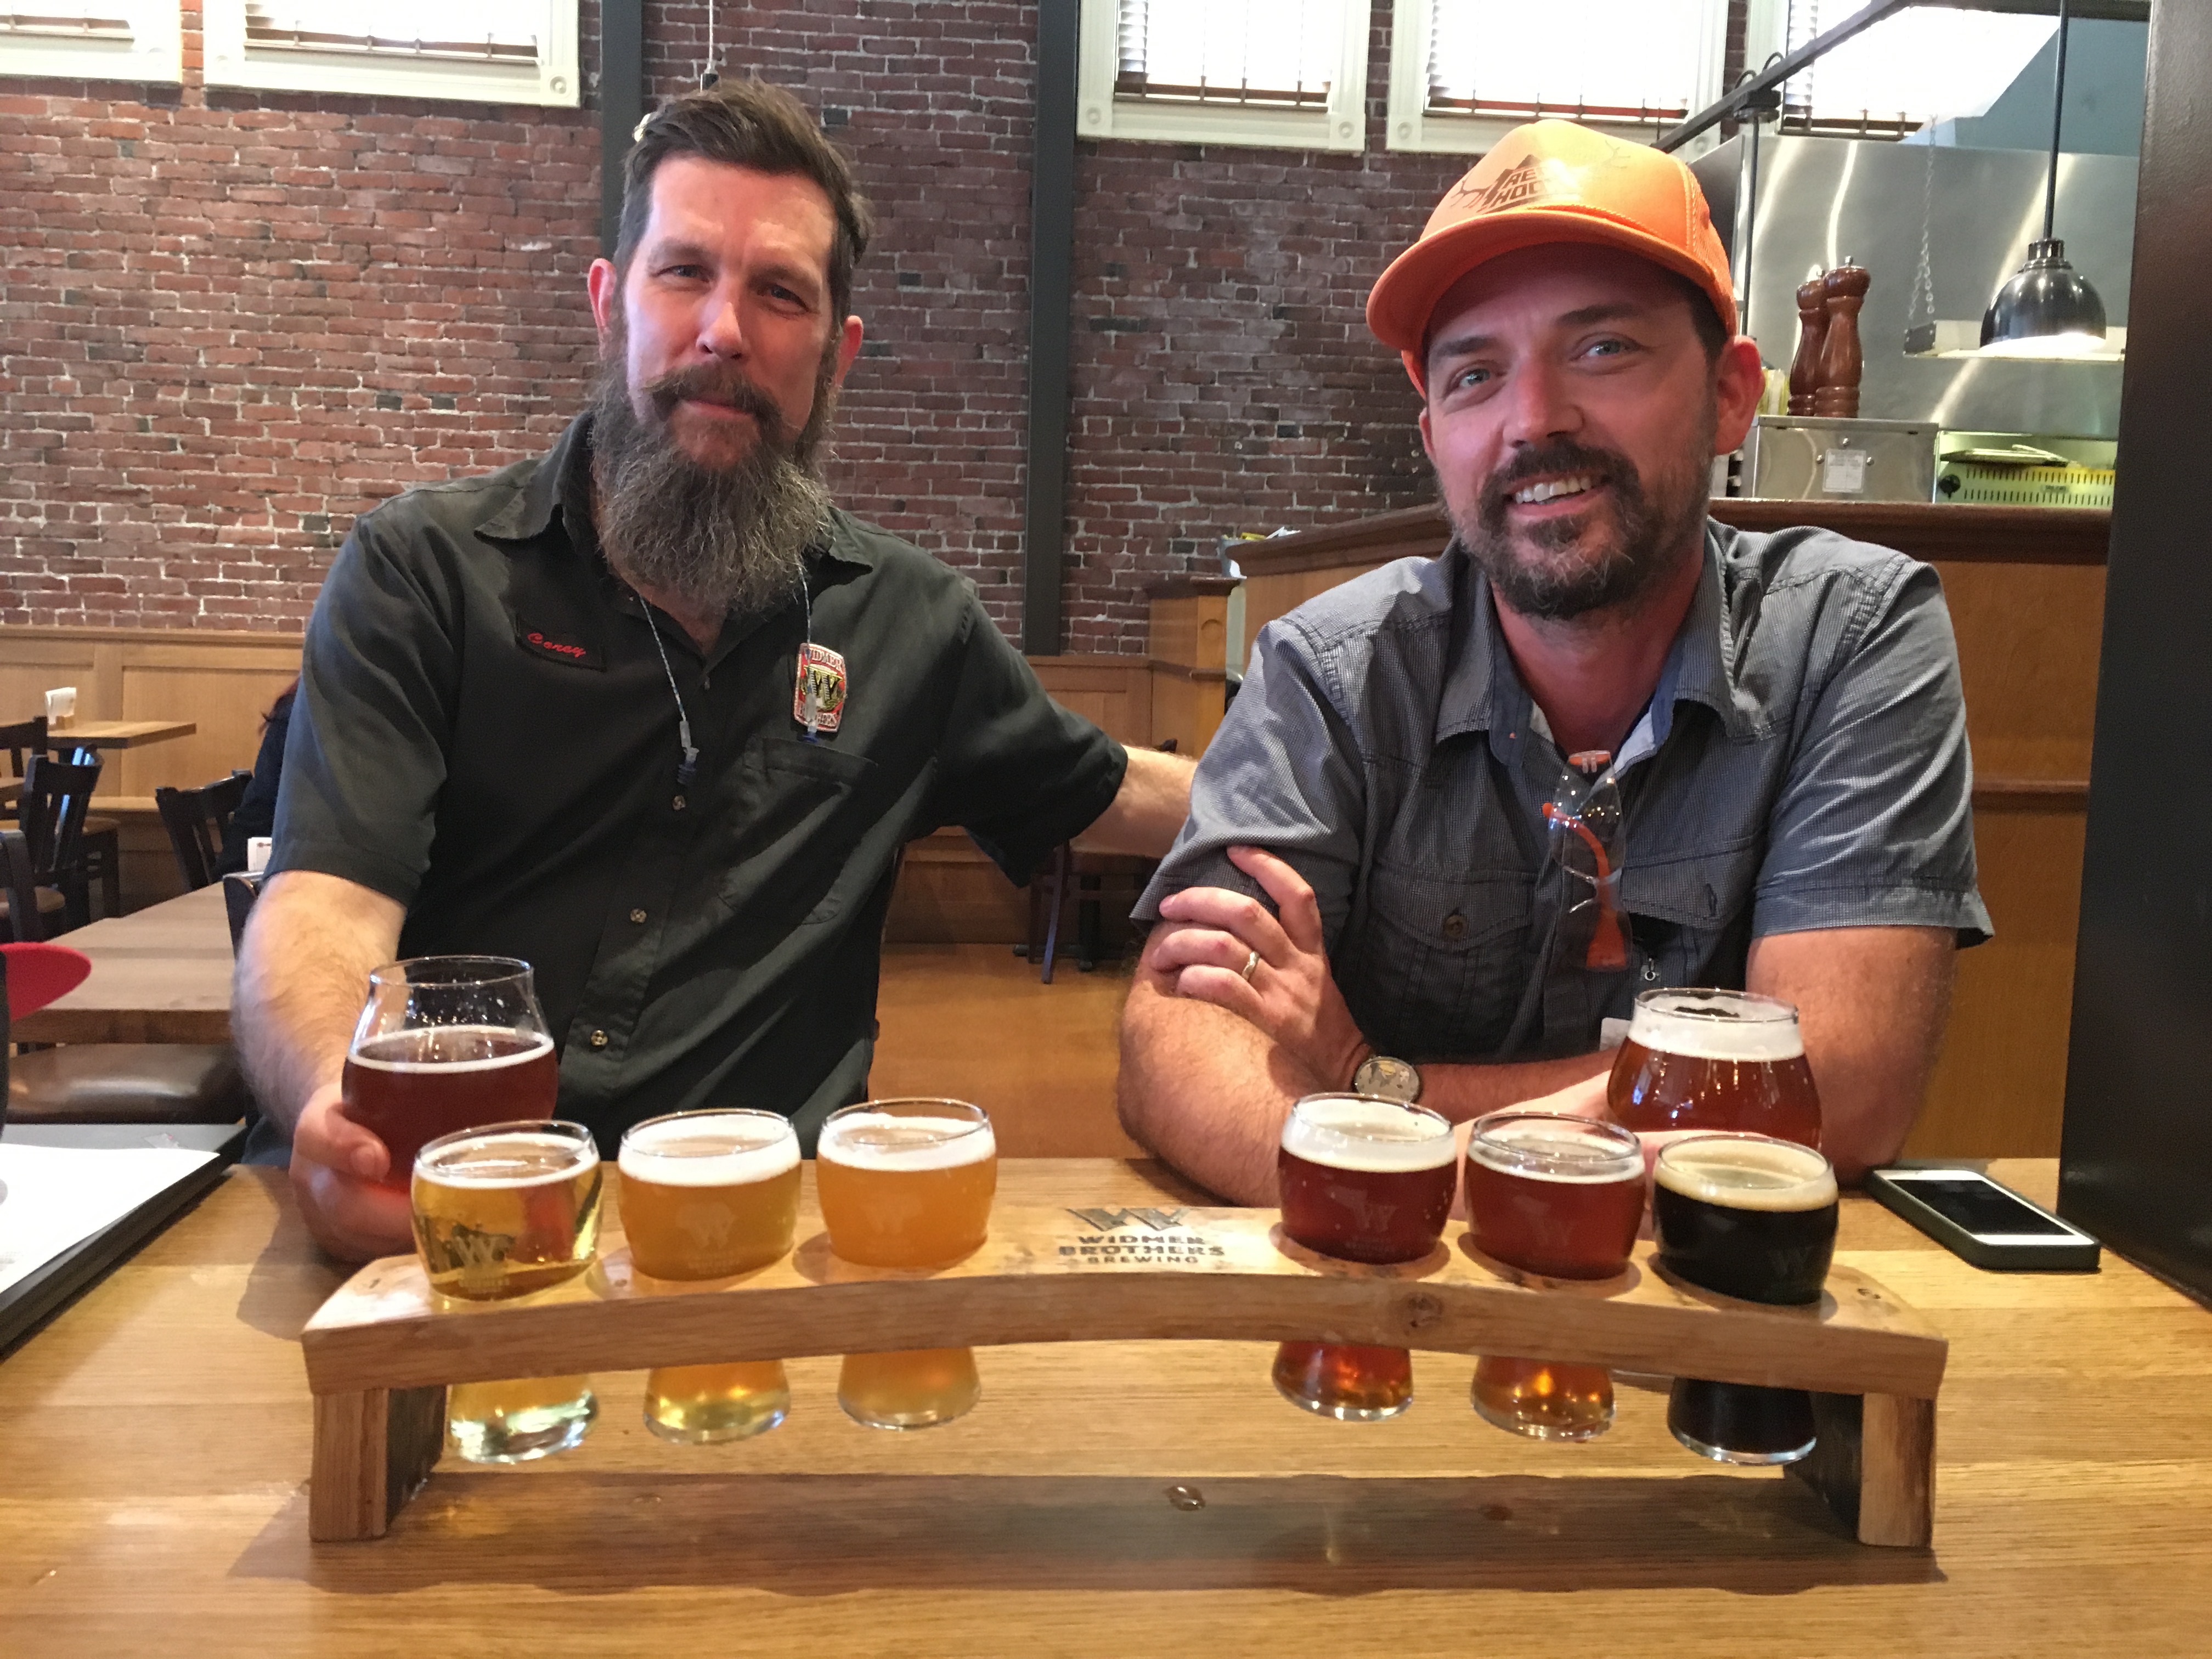 Sampling beers that were brewed on the new Widmer Brothers Brewing Innovation Brewery with brewers Corey Blodgett and Tom Bleigh.